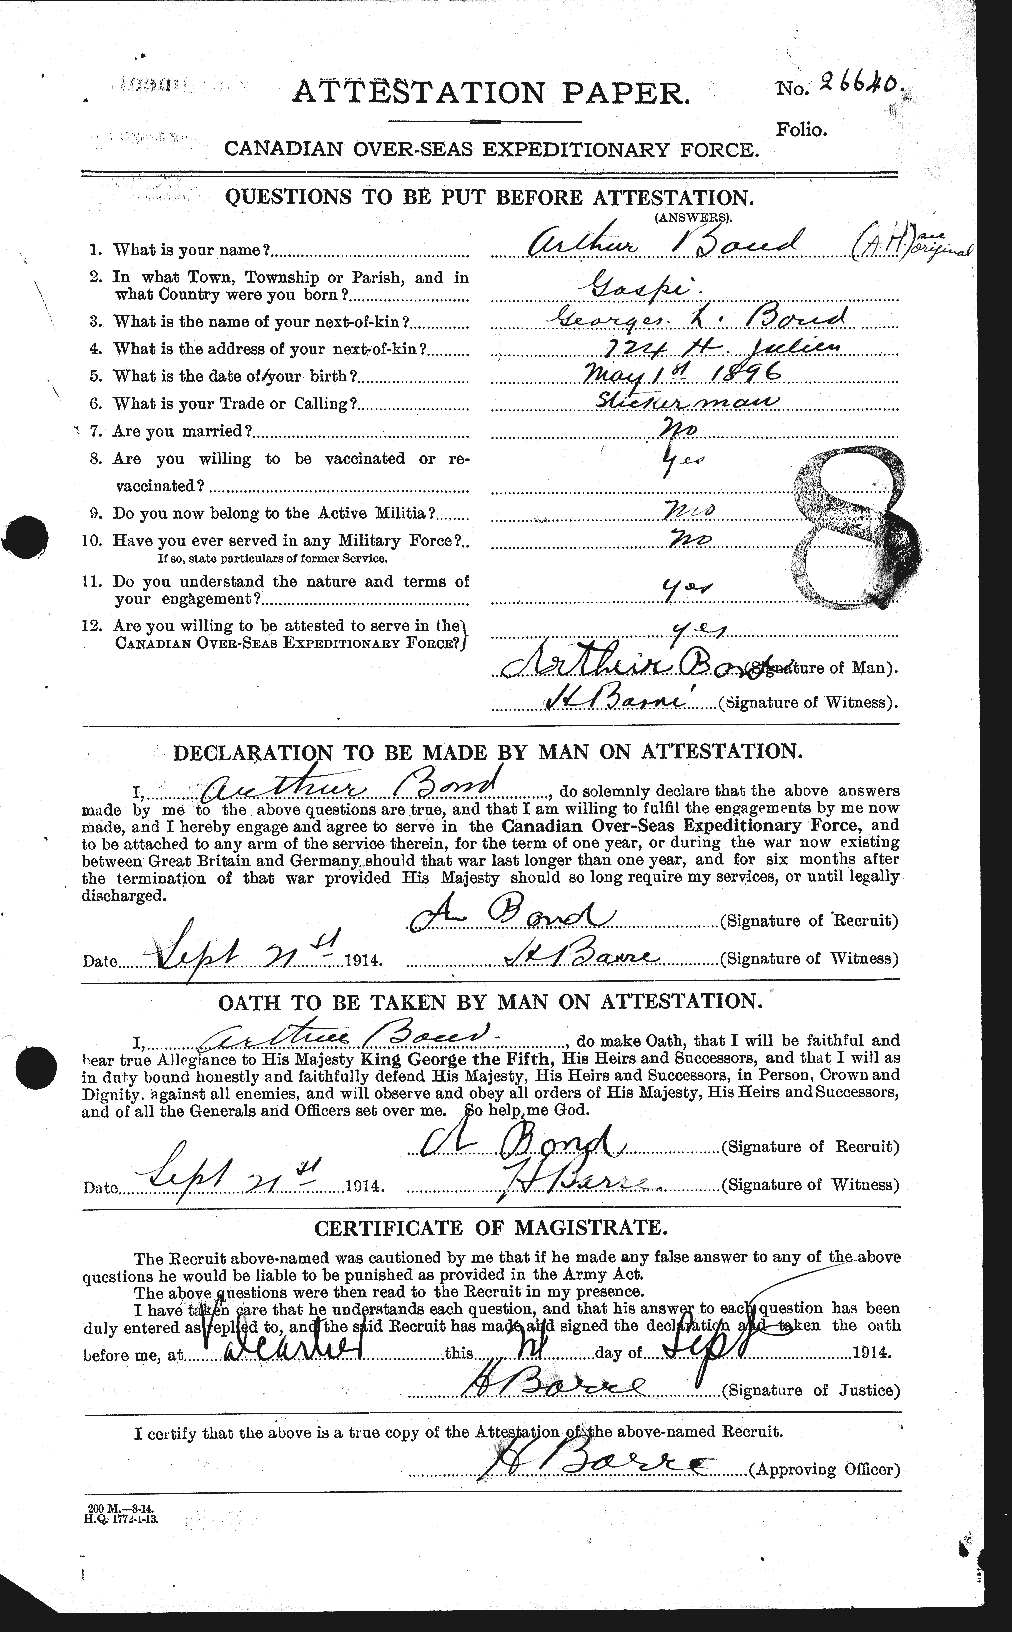 Personnel Records of the First World War - CEF 250254a